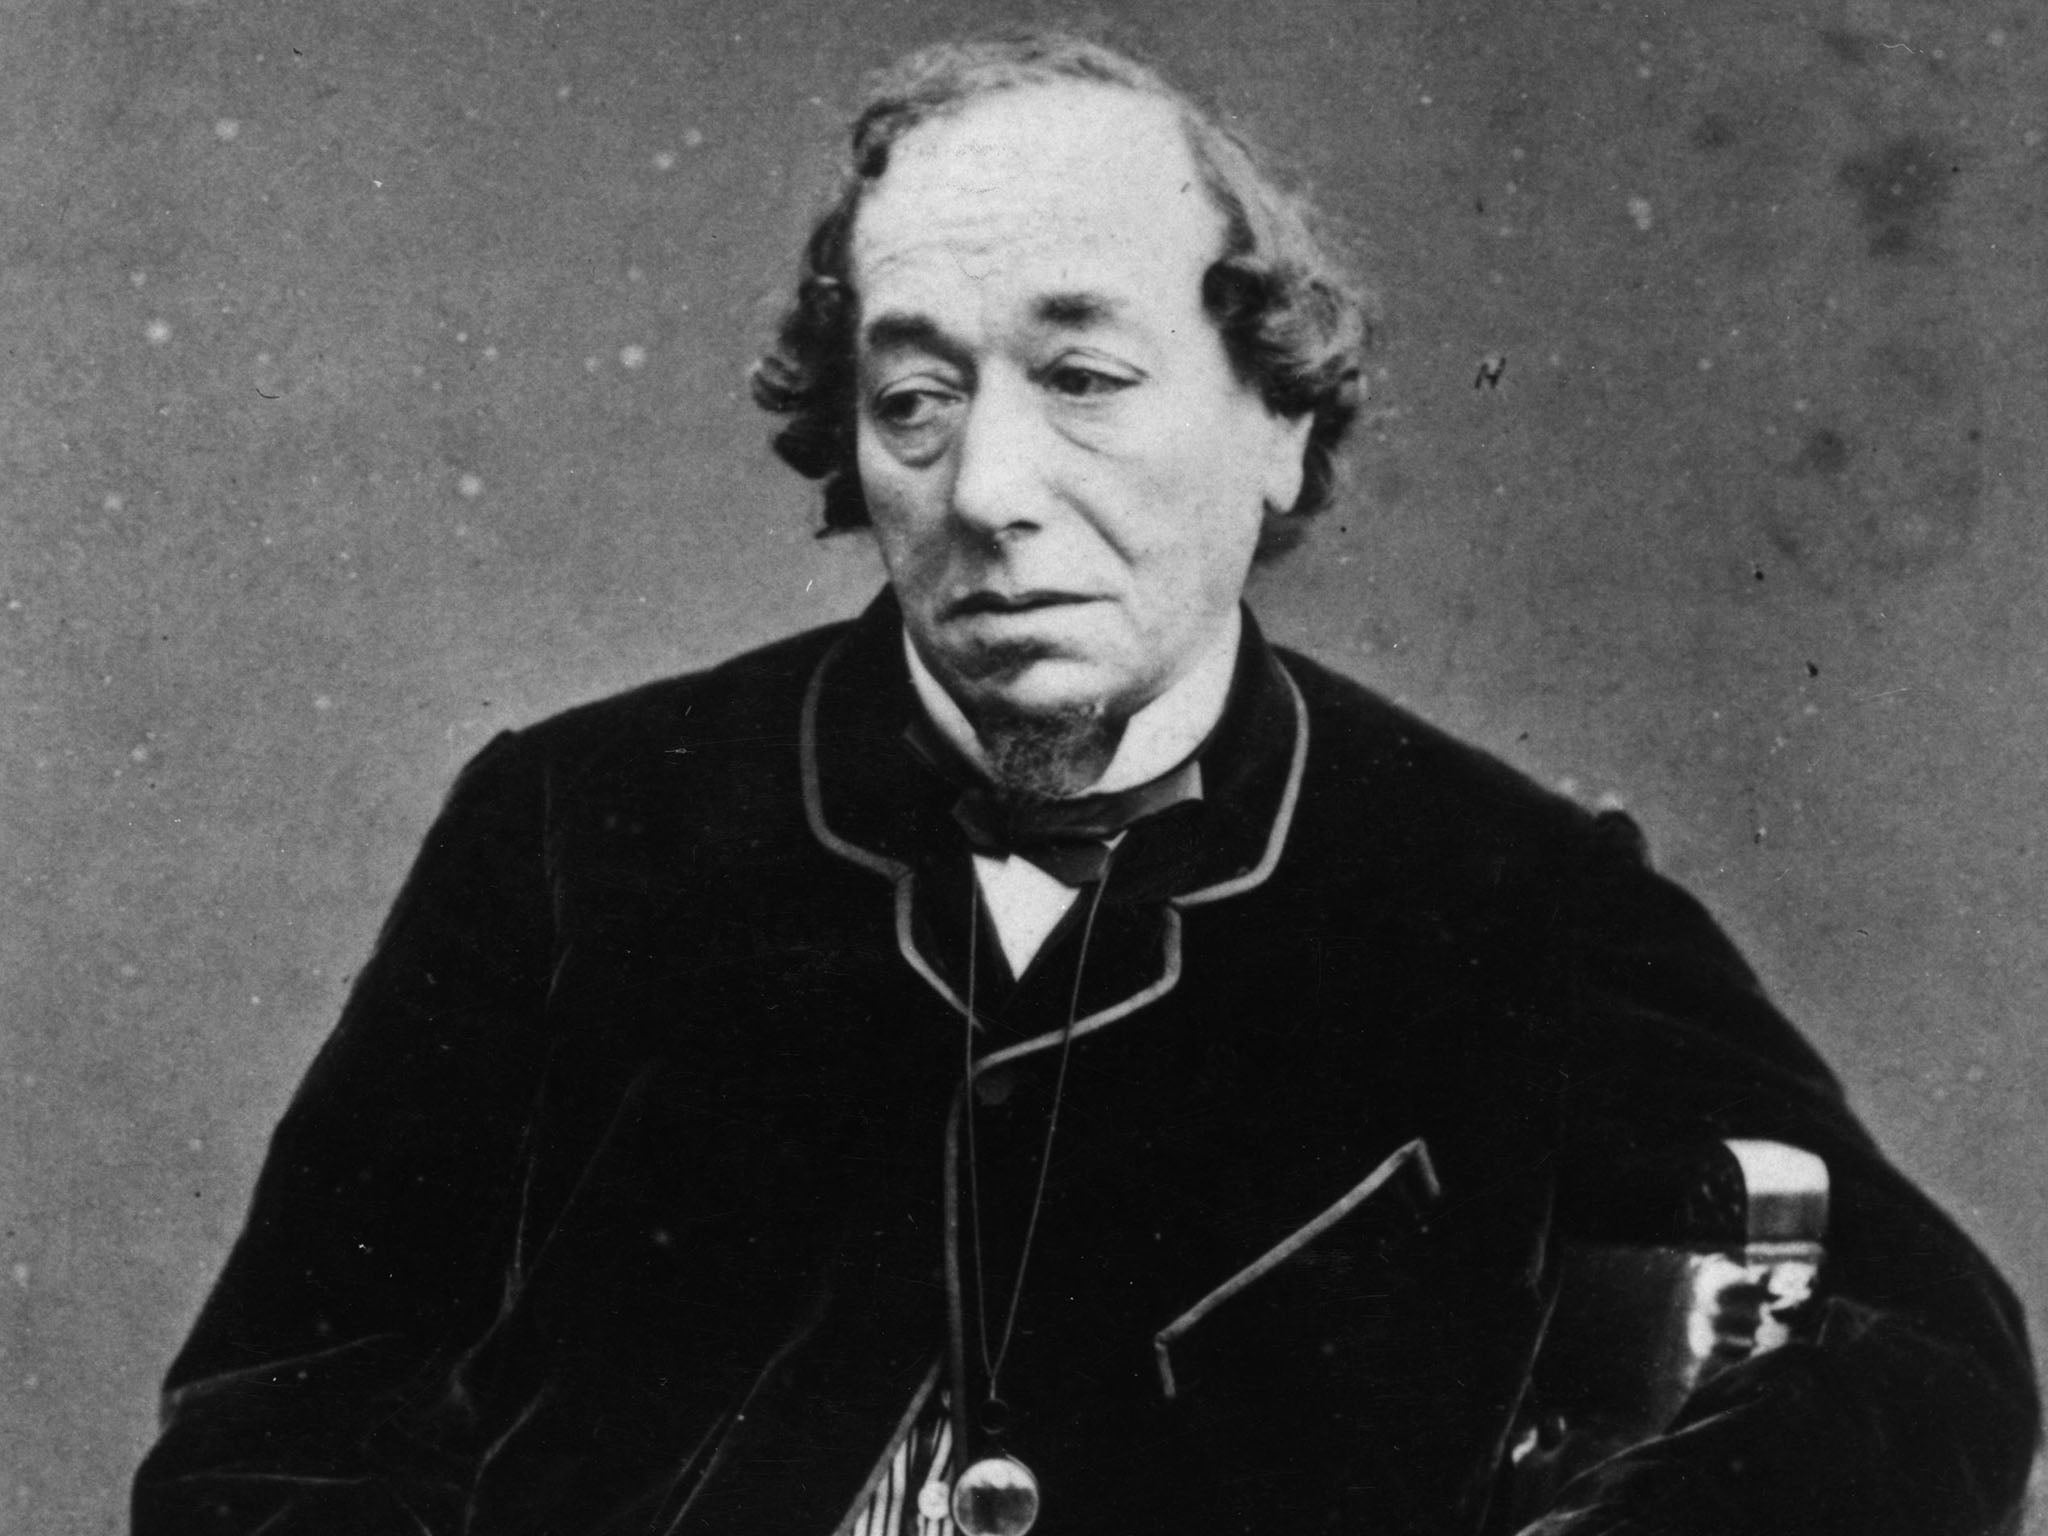 Benjamin Disraeli built on Nightingale’s ideas with legislation to combat filthy living conditions that caused health threats